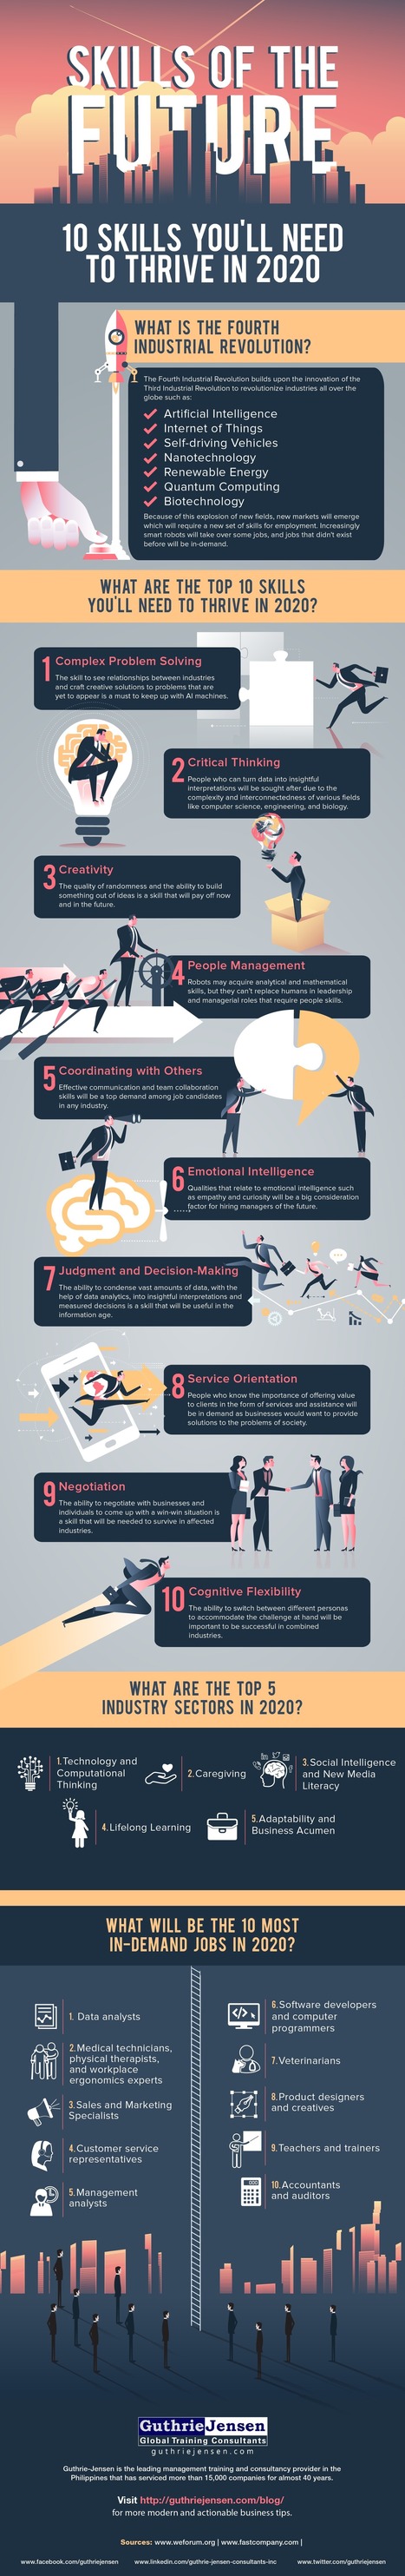 10 Skills That Every Employee Will Need To Thrive in 2020 (Infographic) - Social Talent | 21st Century Learning and Teaching | Scoop.it